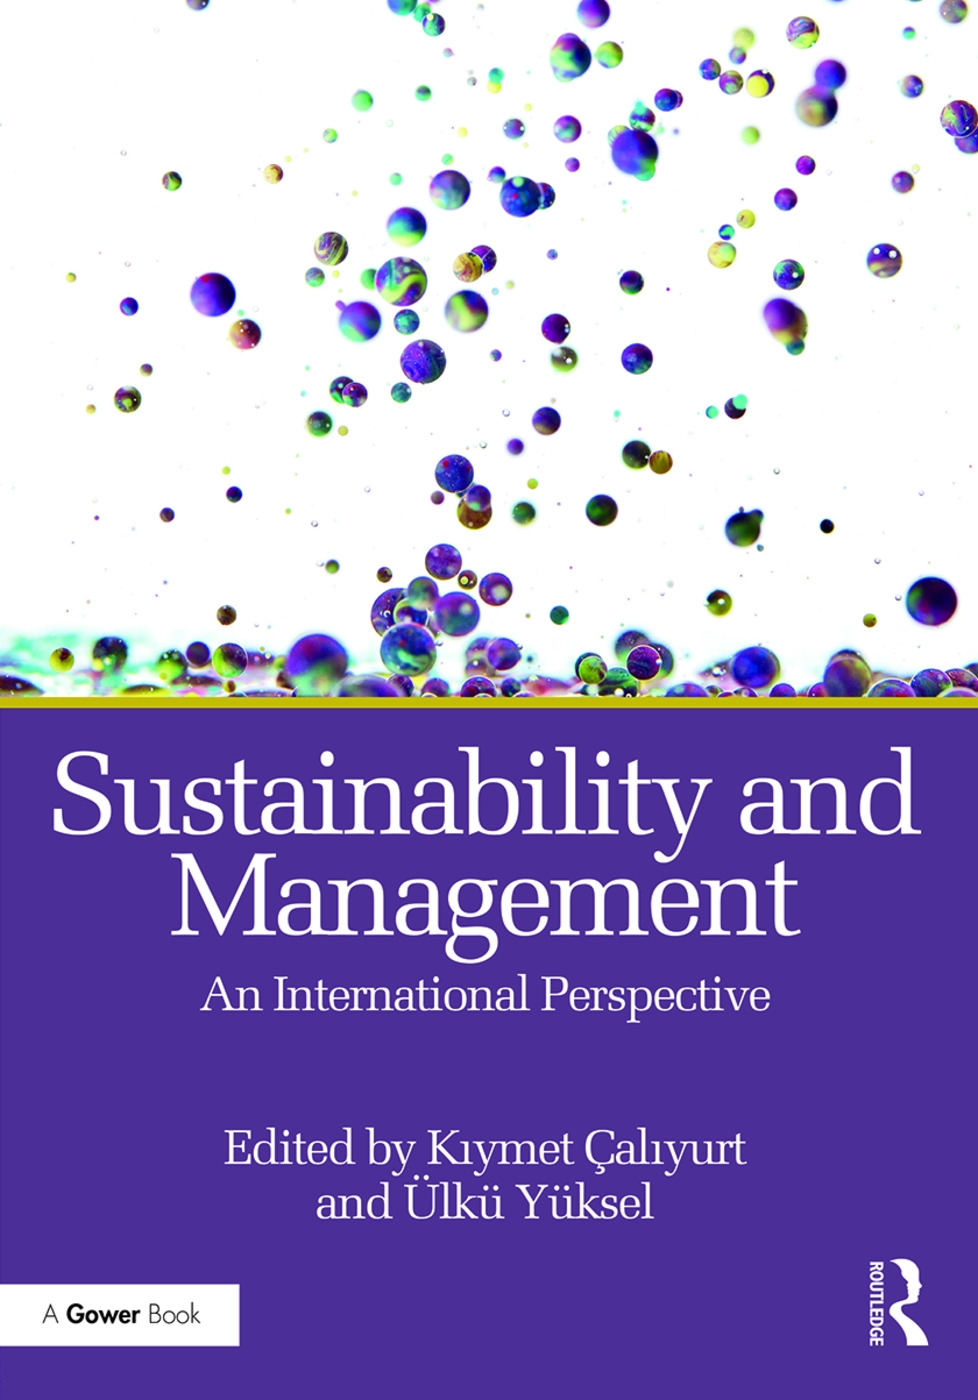 Sustainability and Management: An International Perspective